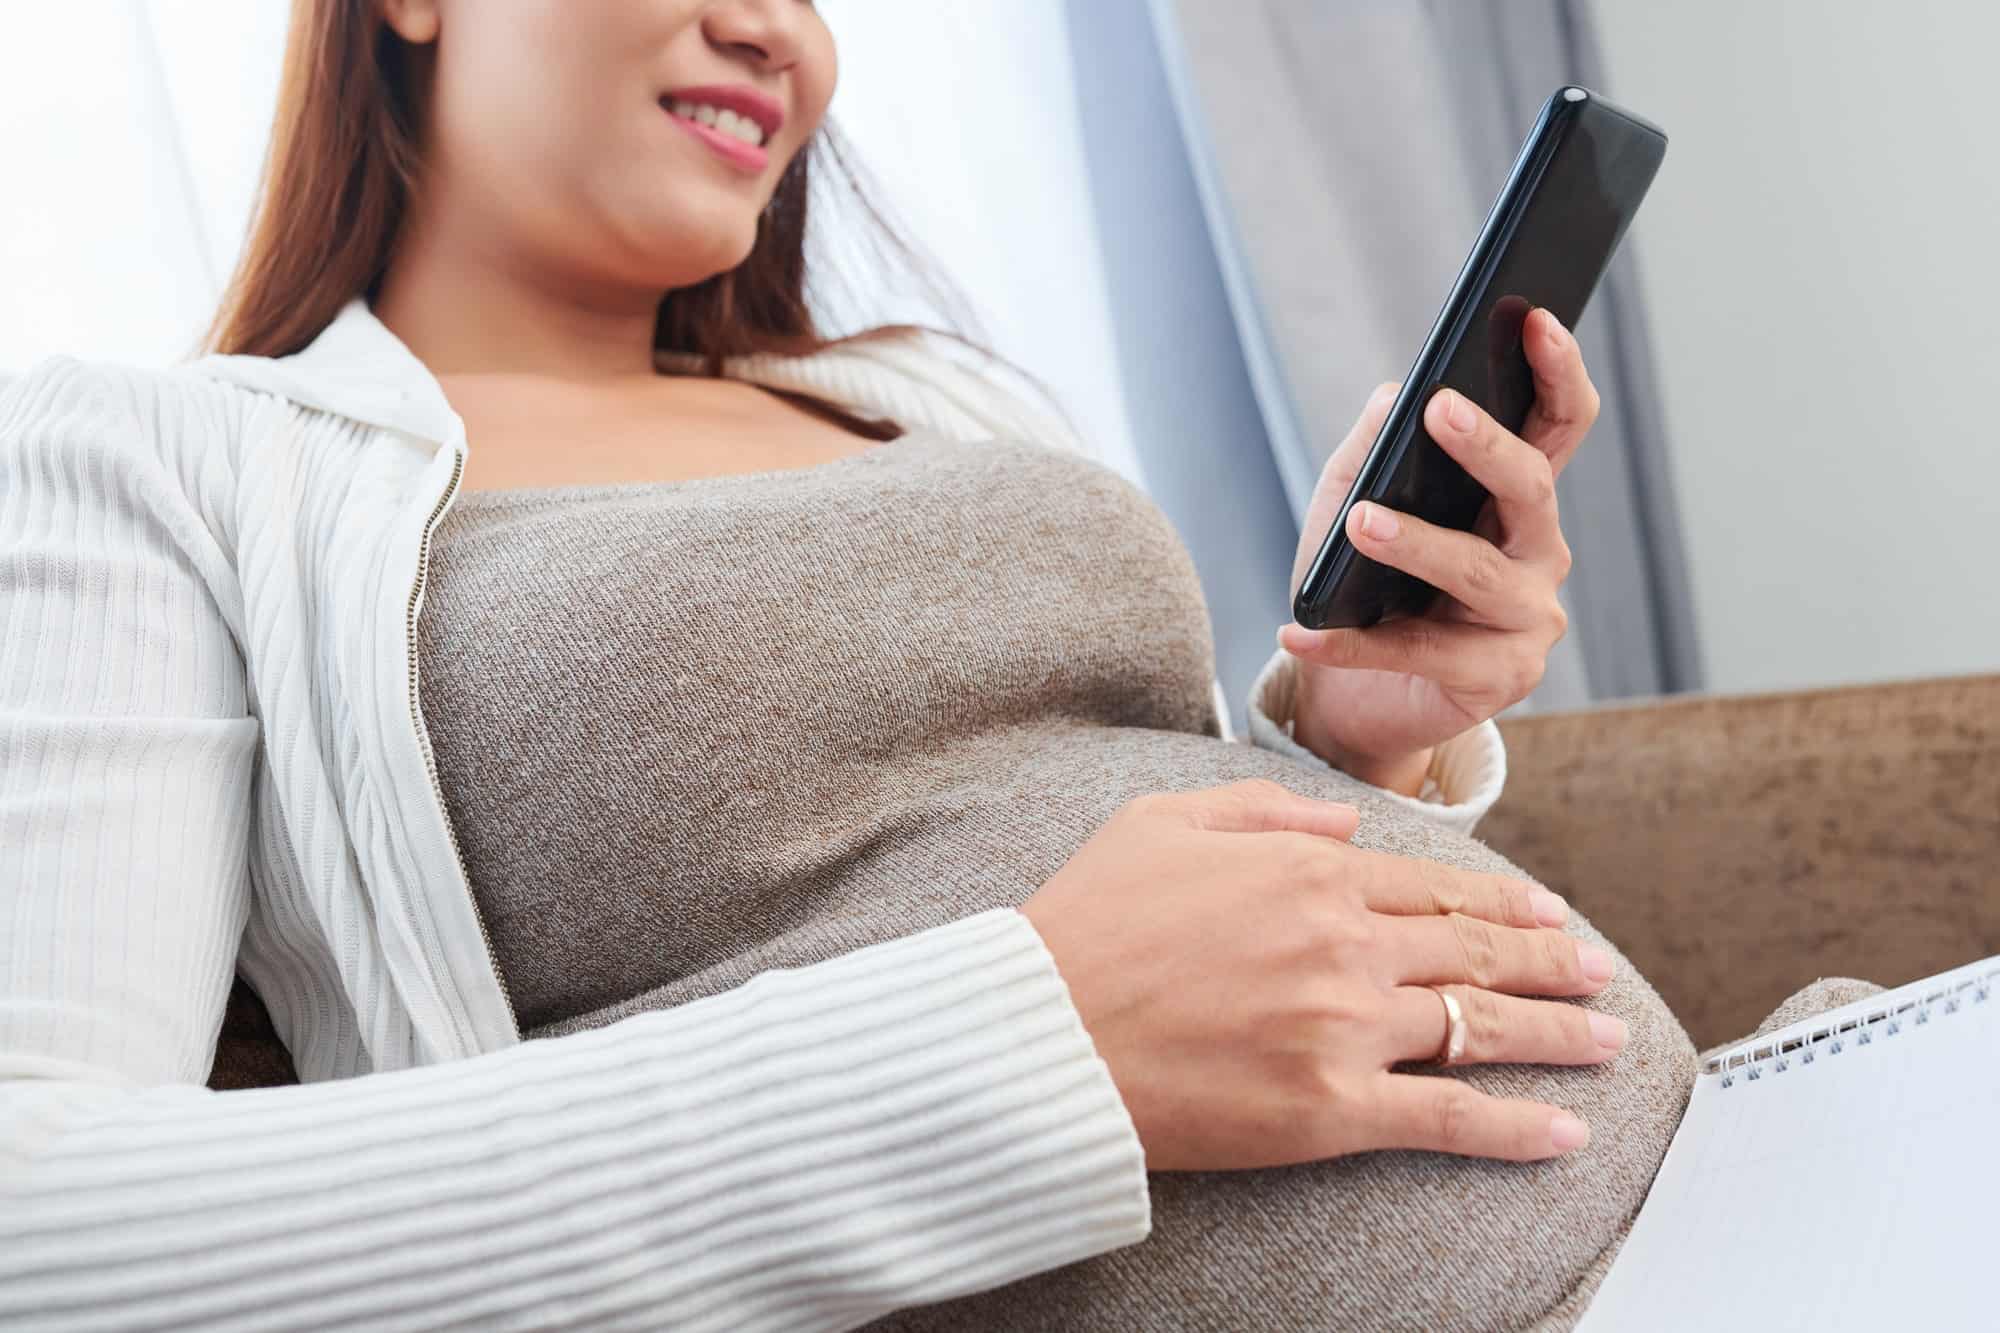 Pregnant? There's an App for That!